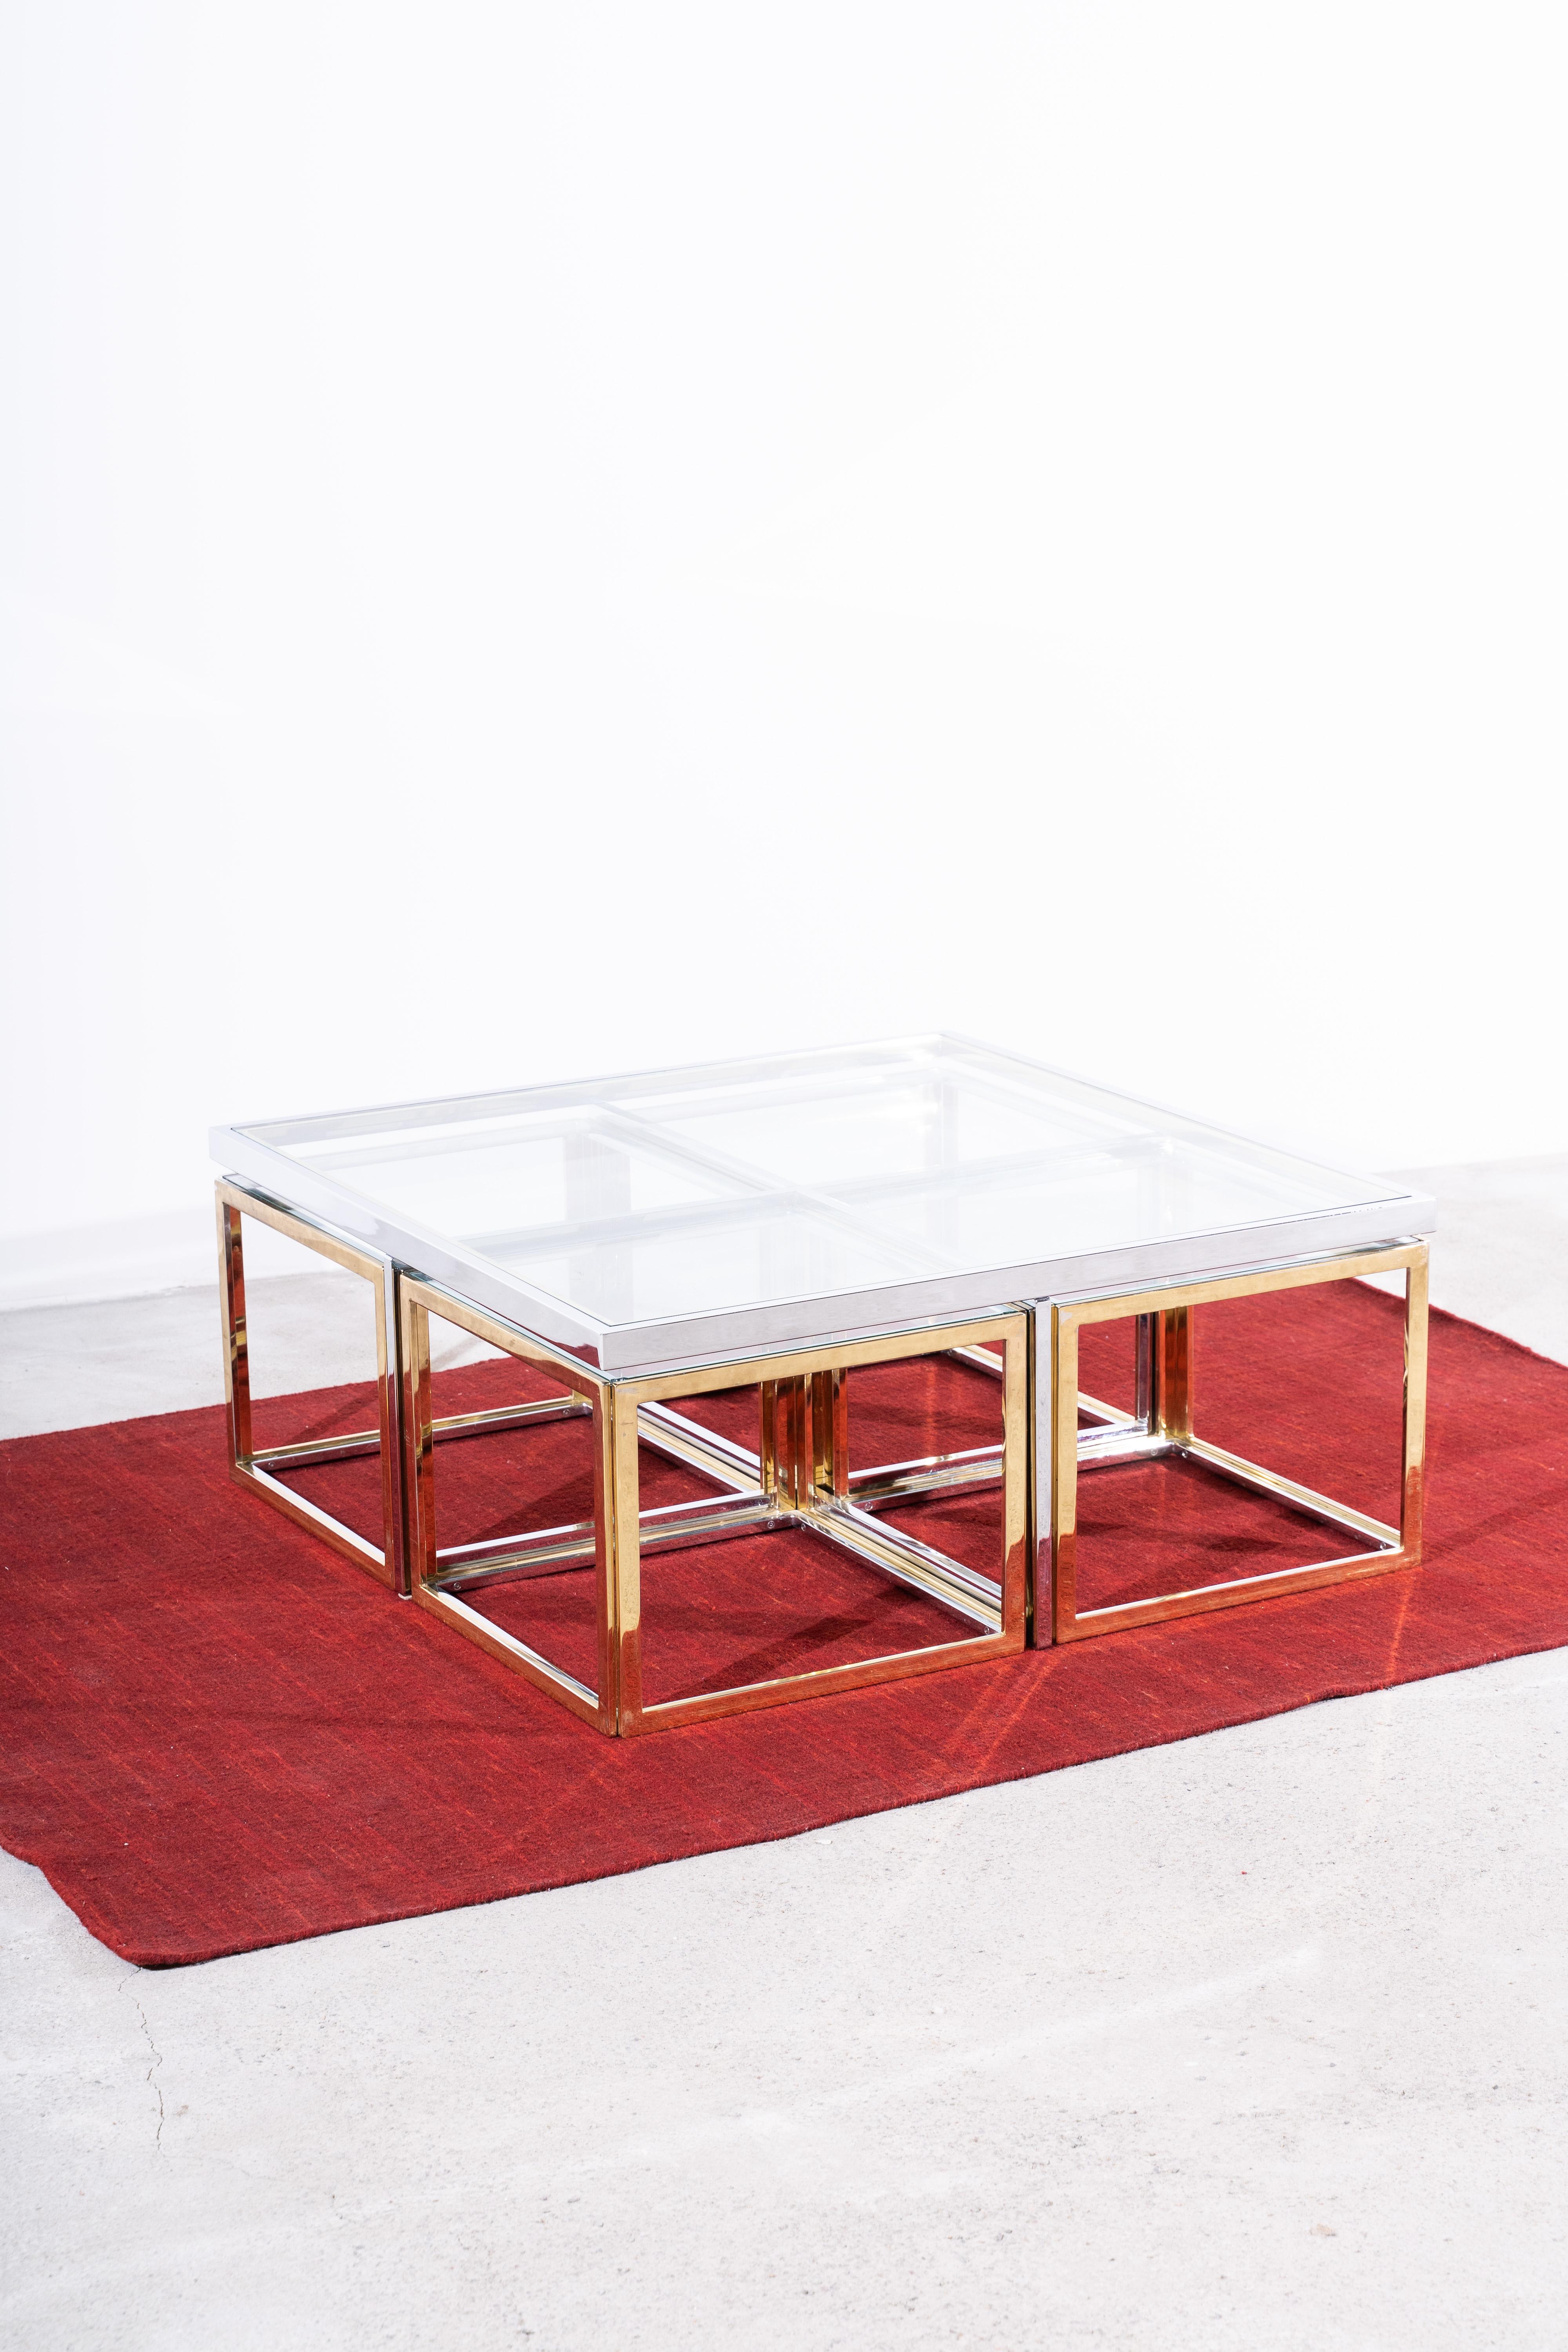 Extremely rare Maison Charles coffee table with 4 side tables in brassed and chromed steel. 

Very handy, because you can simply slide the four side tables under your table.

Maison Charles was originally founded in 1908 by Ernest Charles in the